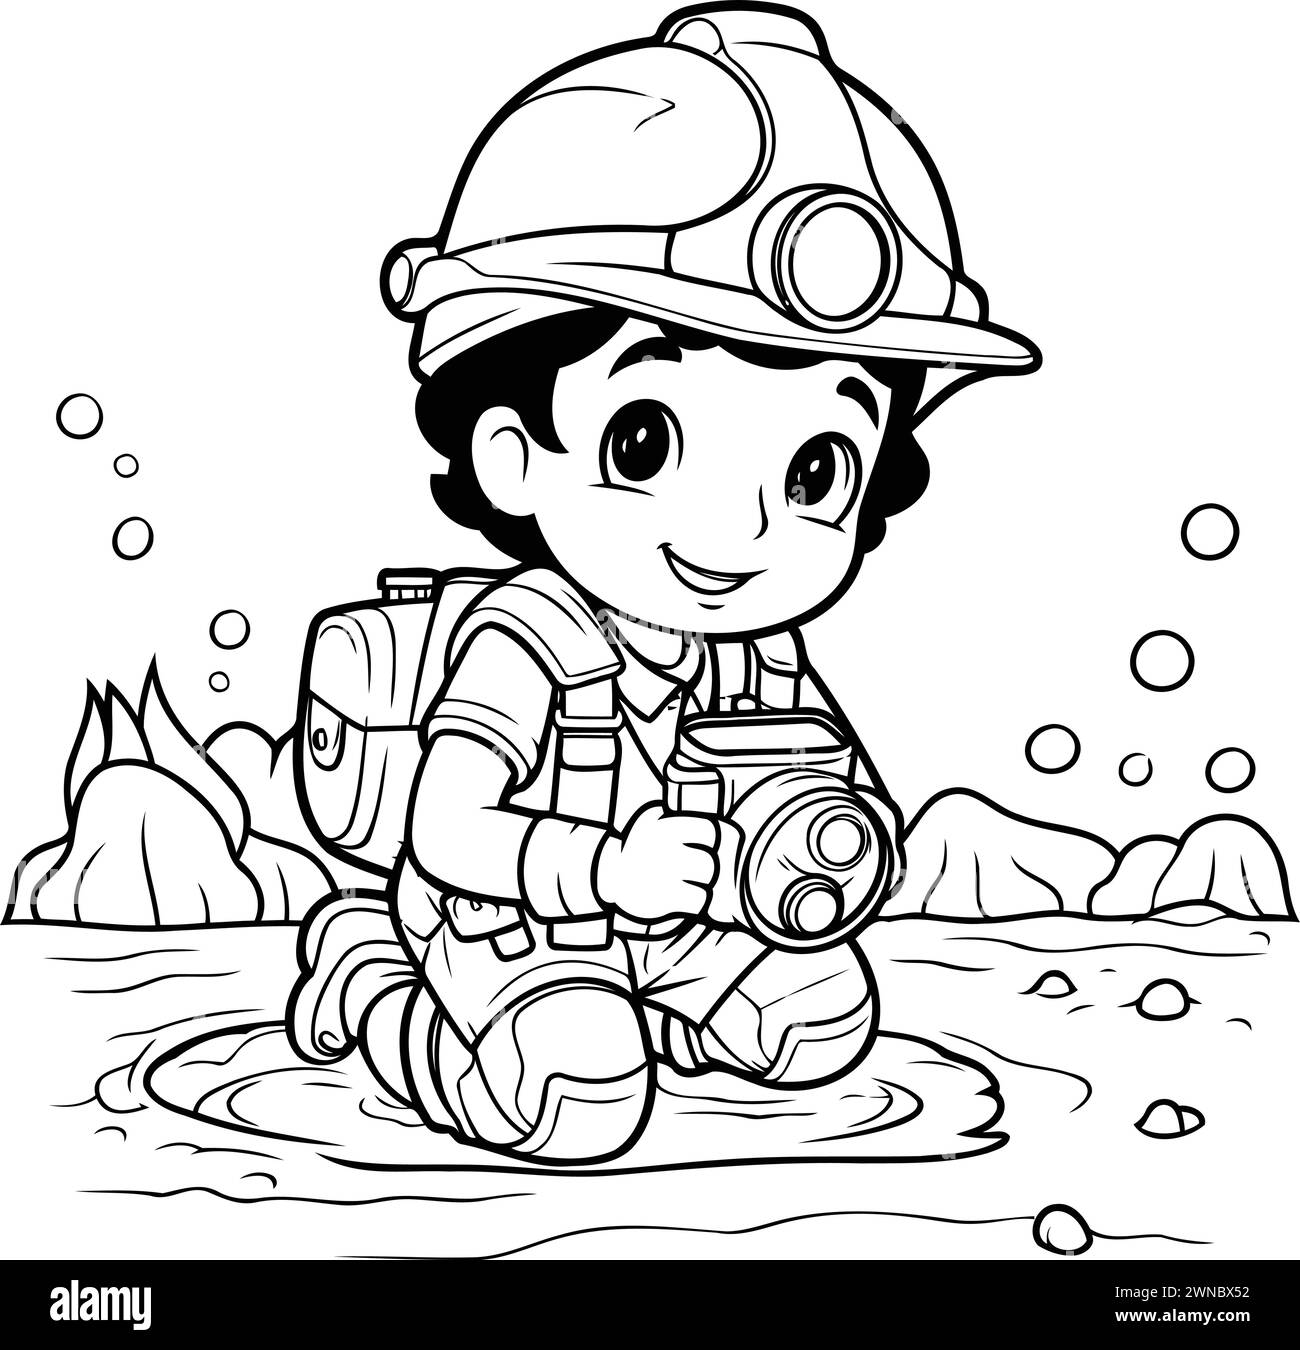 Illustration of a Kid Boy Wearing a Fireman Costume and a Helmet Playing in a Water Stock Vector